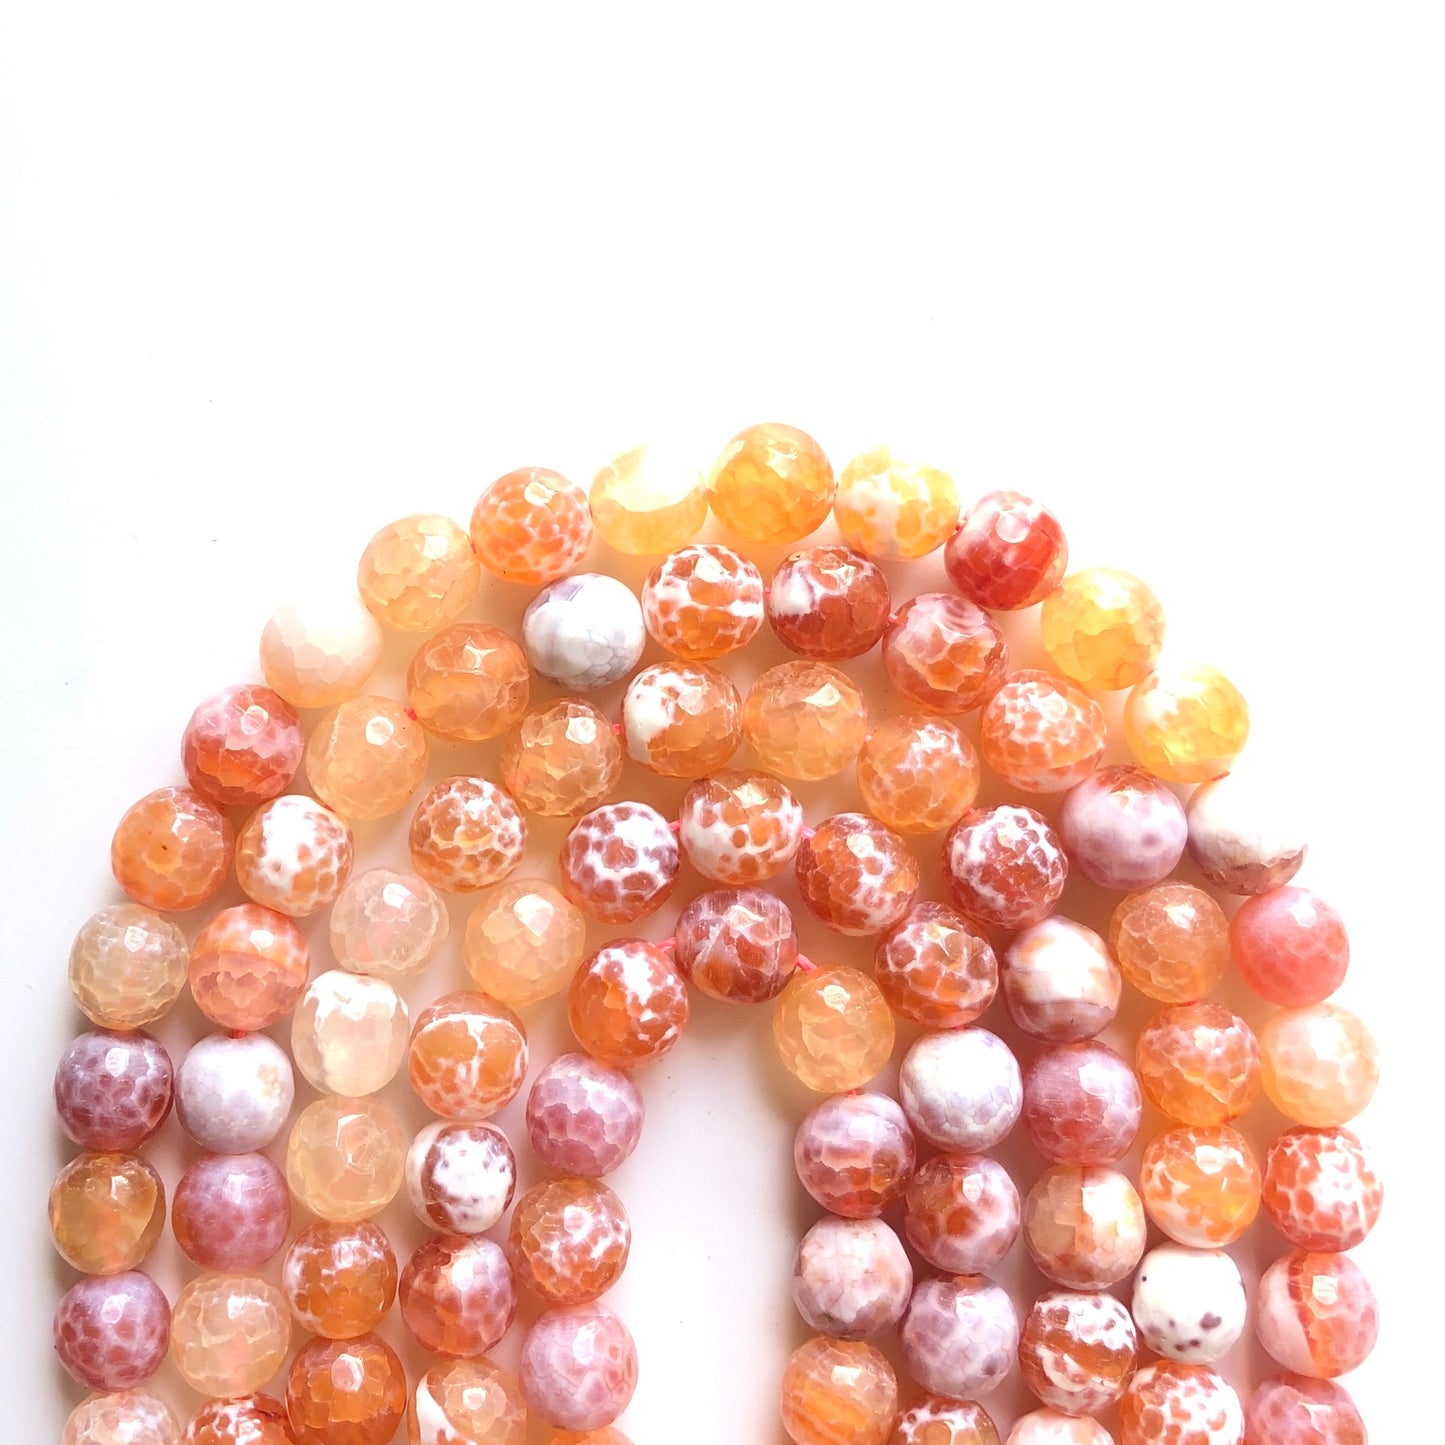 2 Strands/lot 10mm Yellow Faceted Fire Agate Stone Beads Stone Beads Faceted Agate Beads Charms Beads Beyond